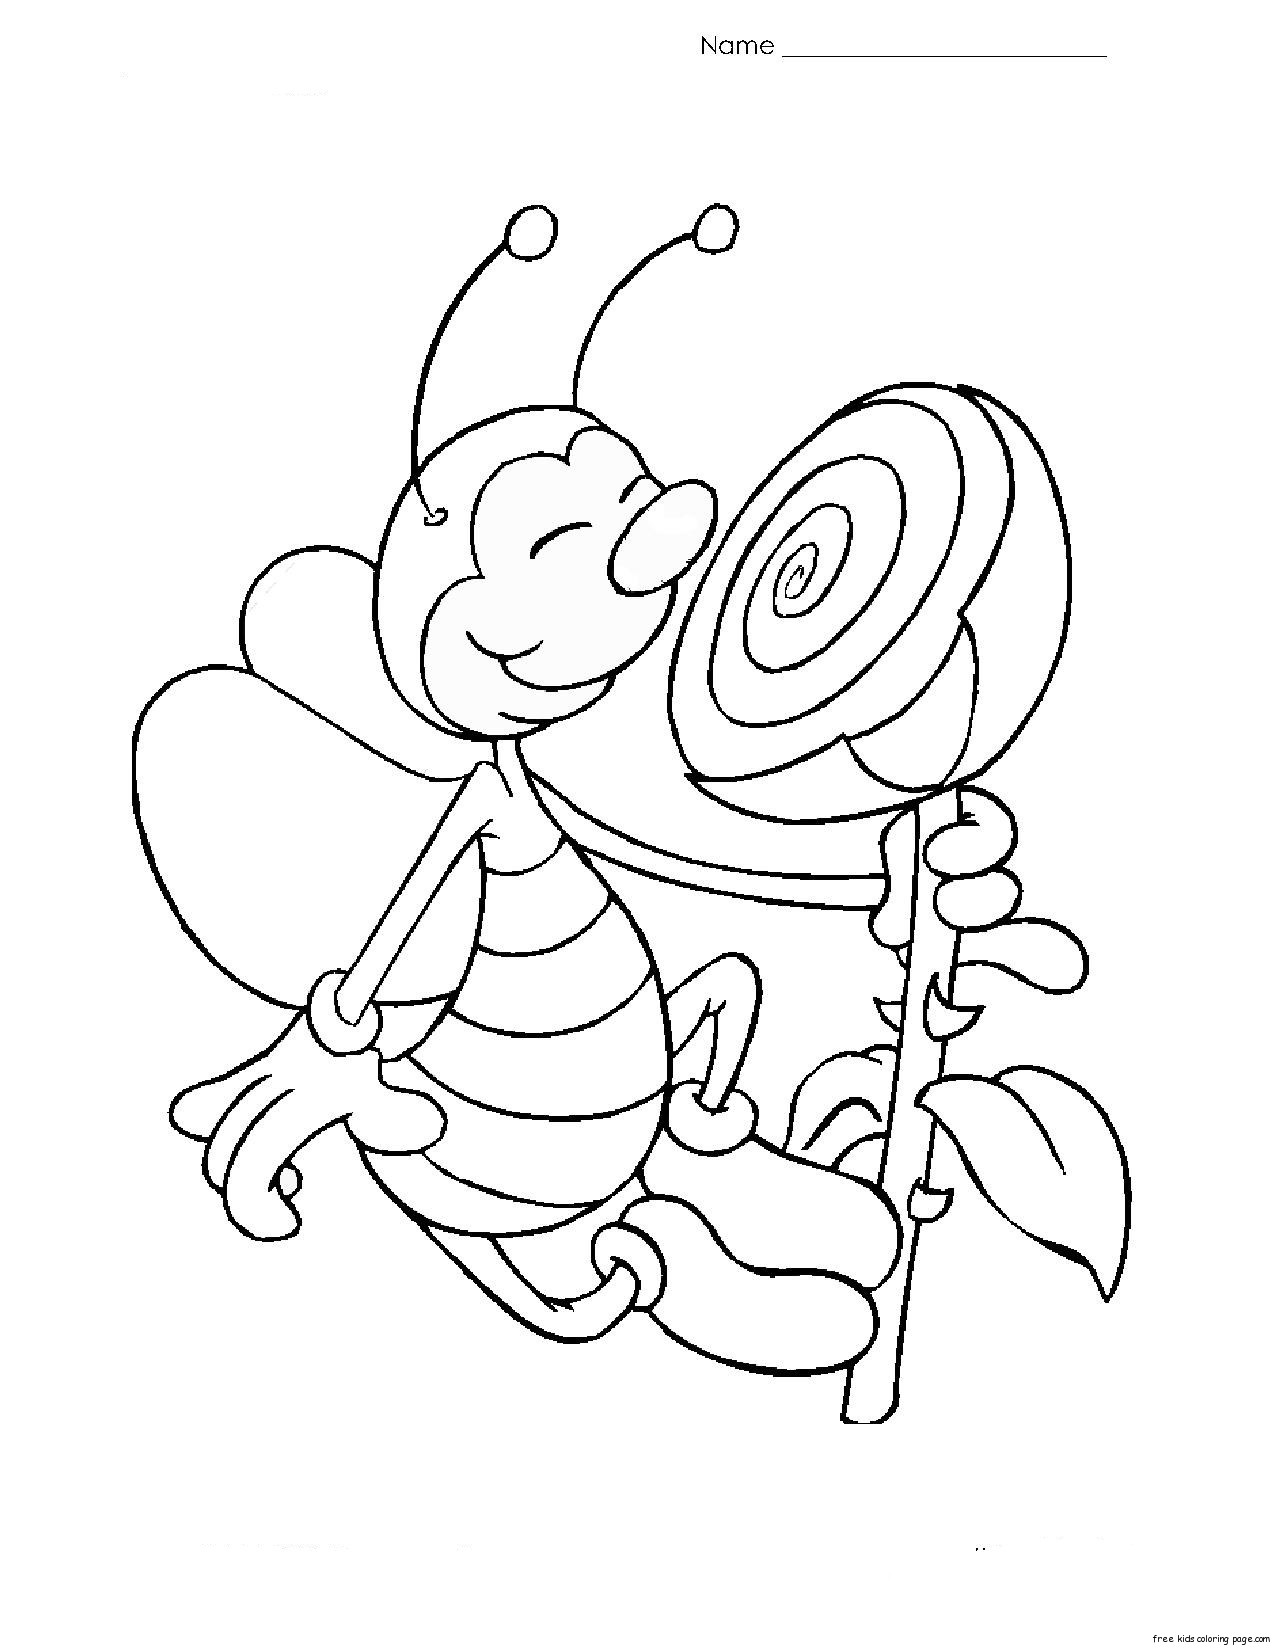 colouring worksheets for grade 1 print out coloring page bee with flower for kidsfree worksheets colouring 1 grade for 